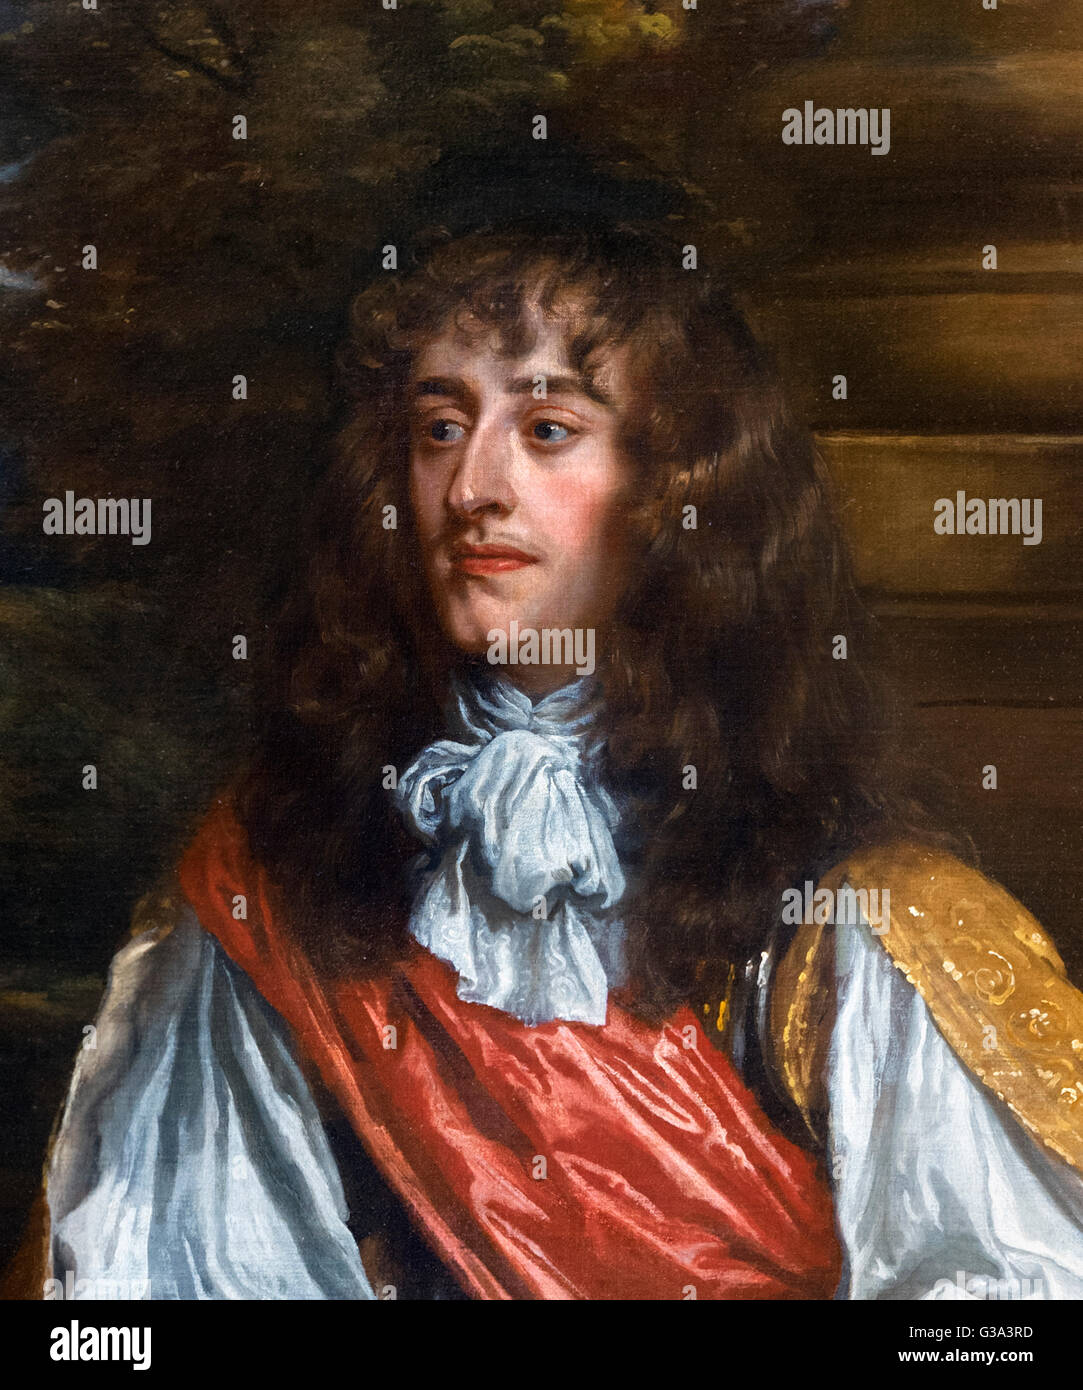 James II and VII (1633–1701), King of England and Ireland as James II and King of Scotland as James VII. Portrait by Sir Peter Lely, oil on canvas, 1661. Stock Photo